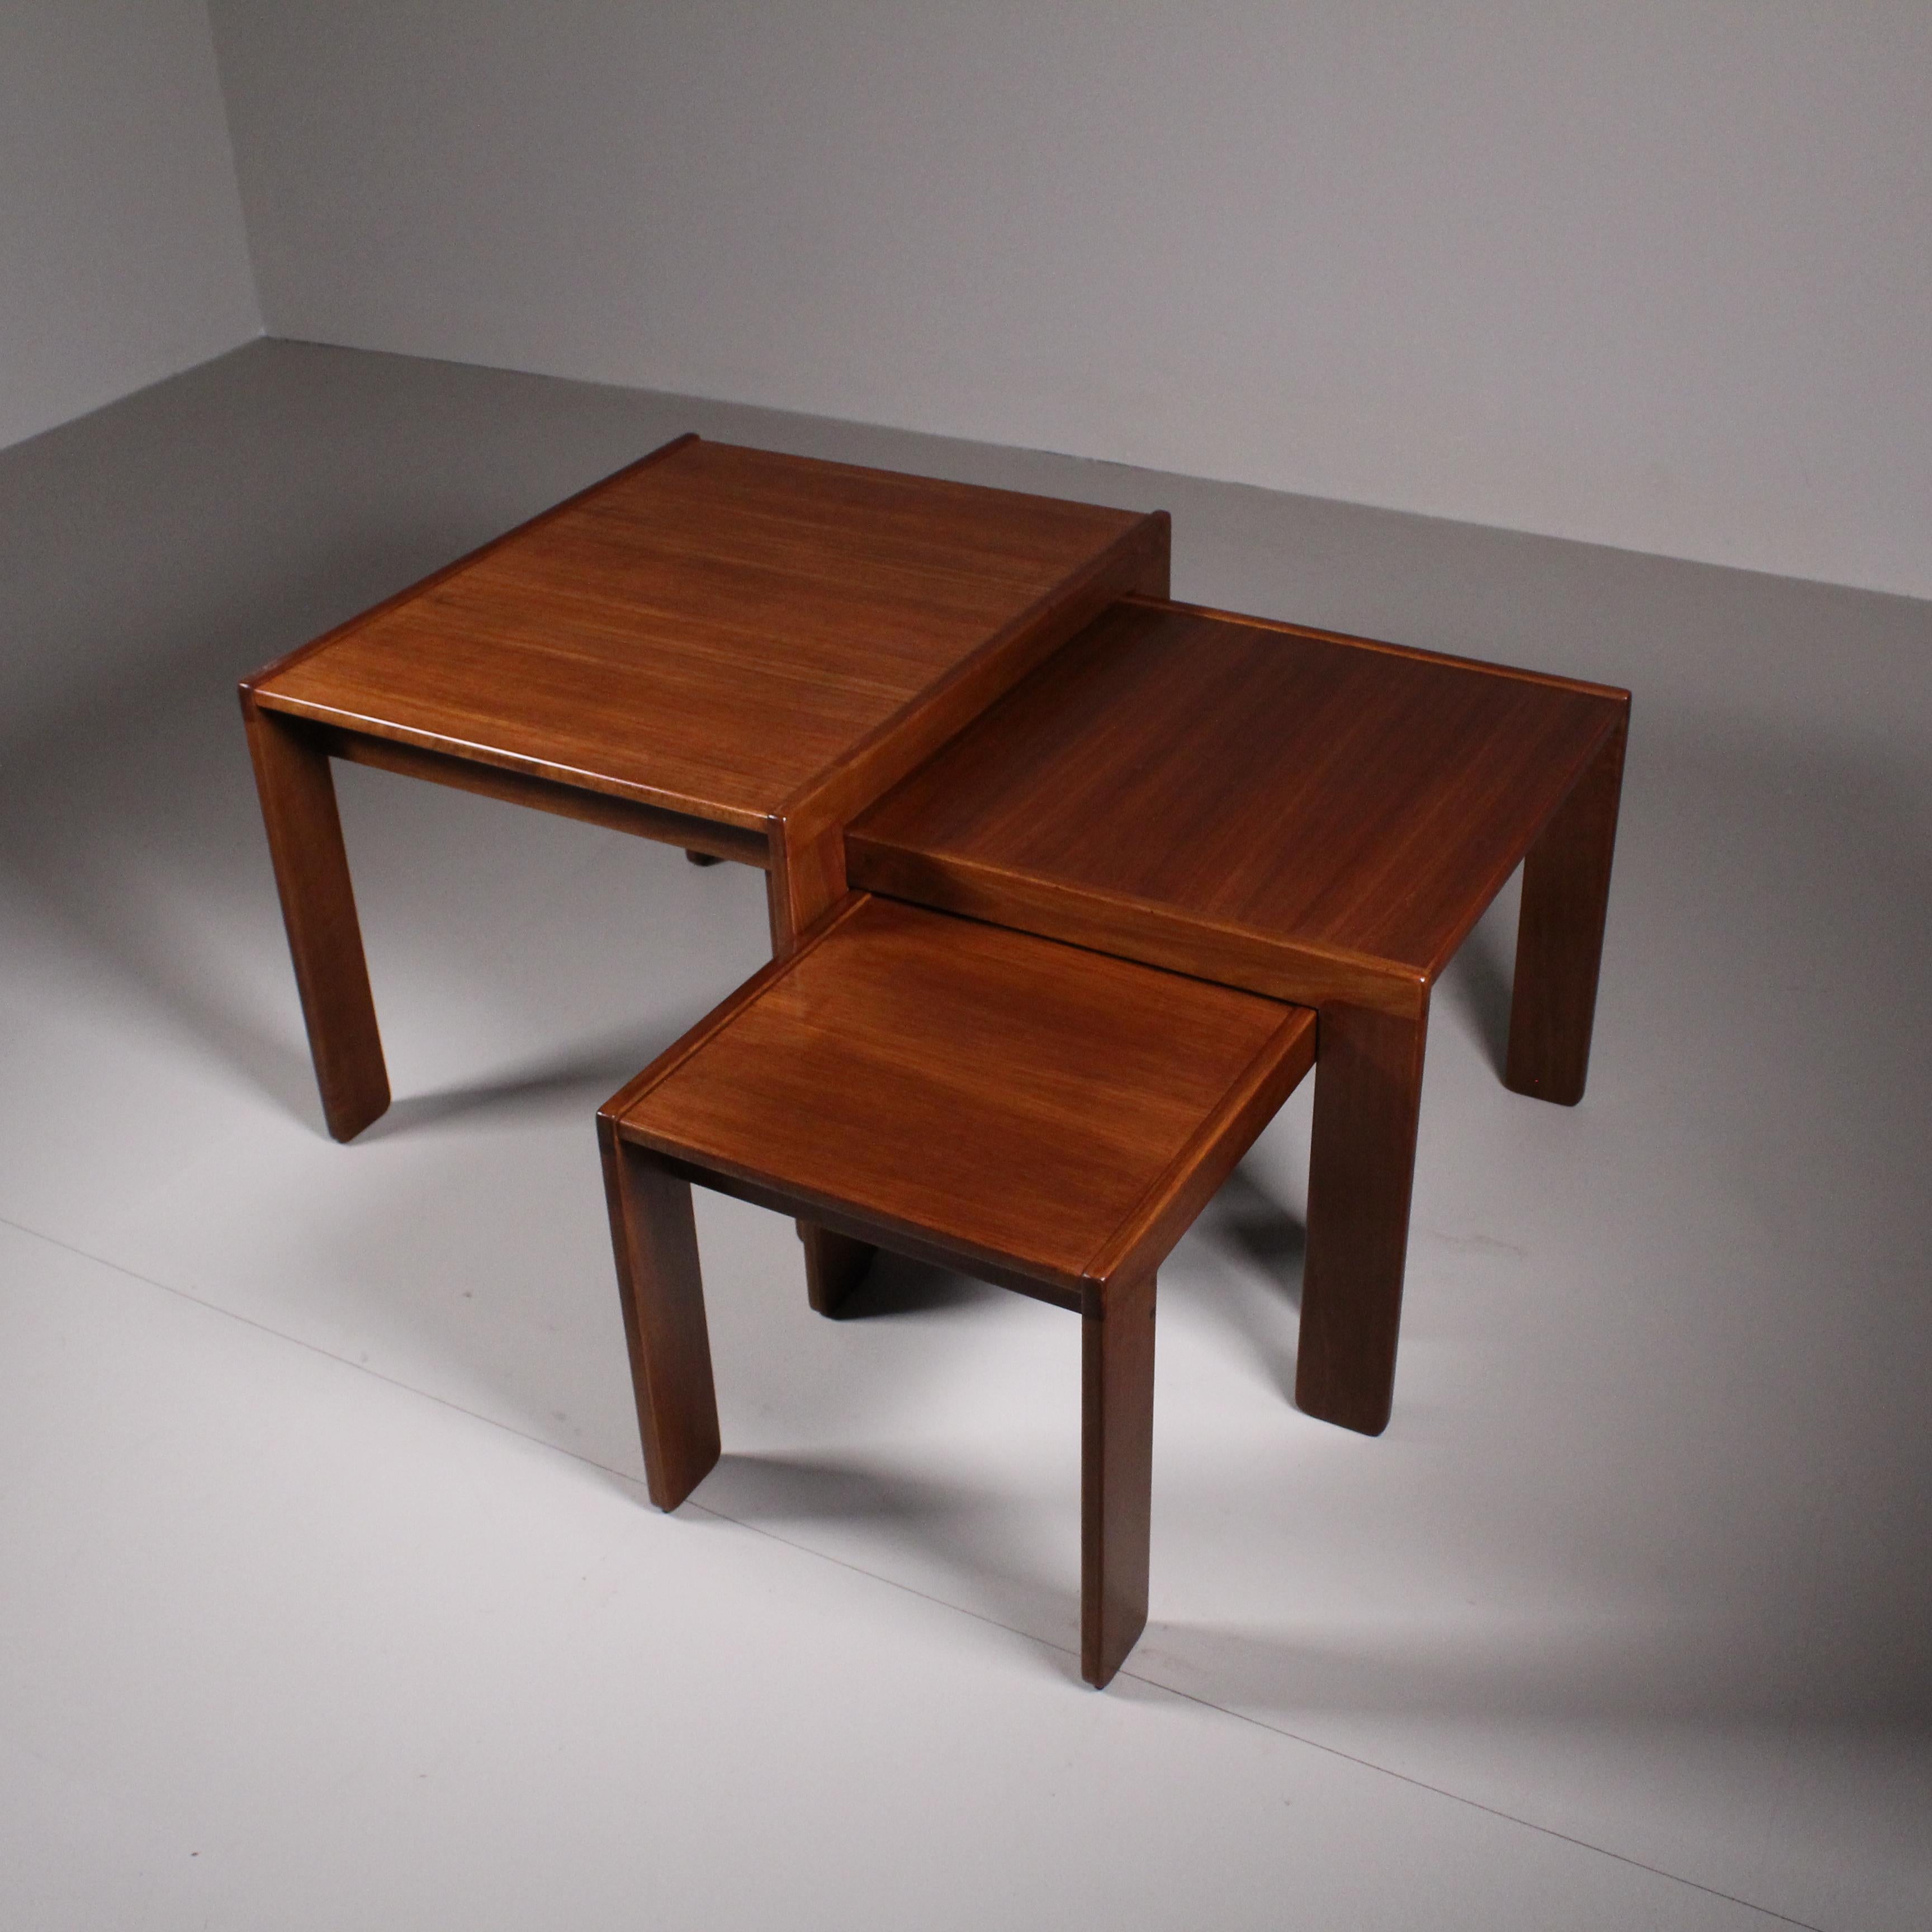 Small tables model 777, Afra and Tobia Scarpa, 1965 Circa For Sale 8